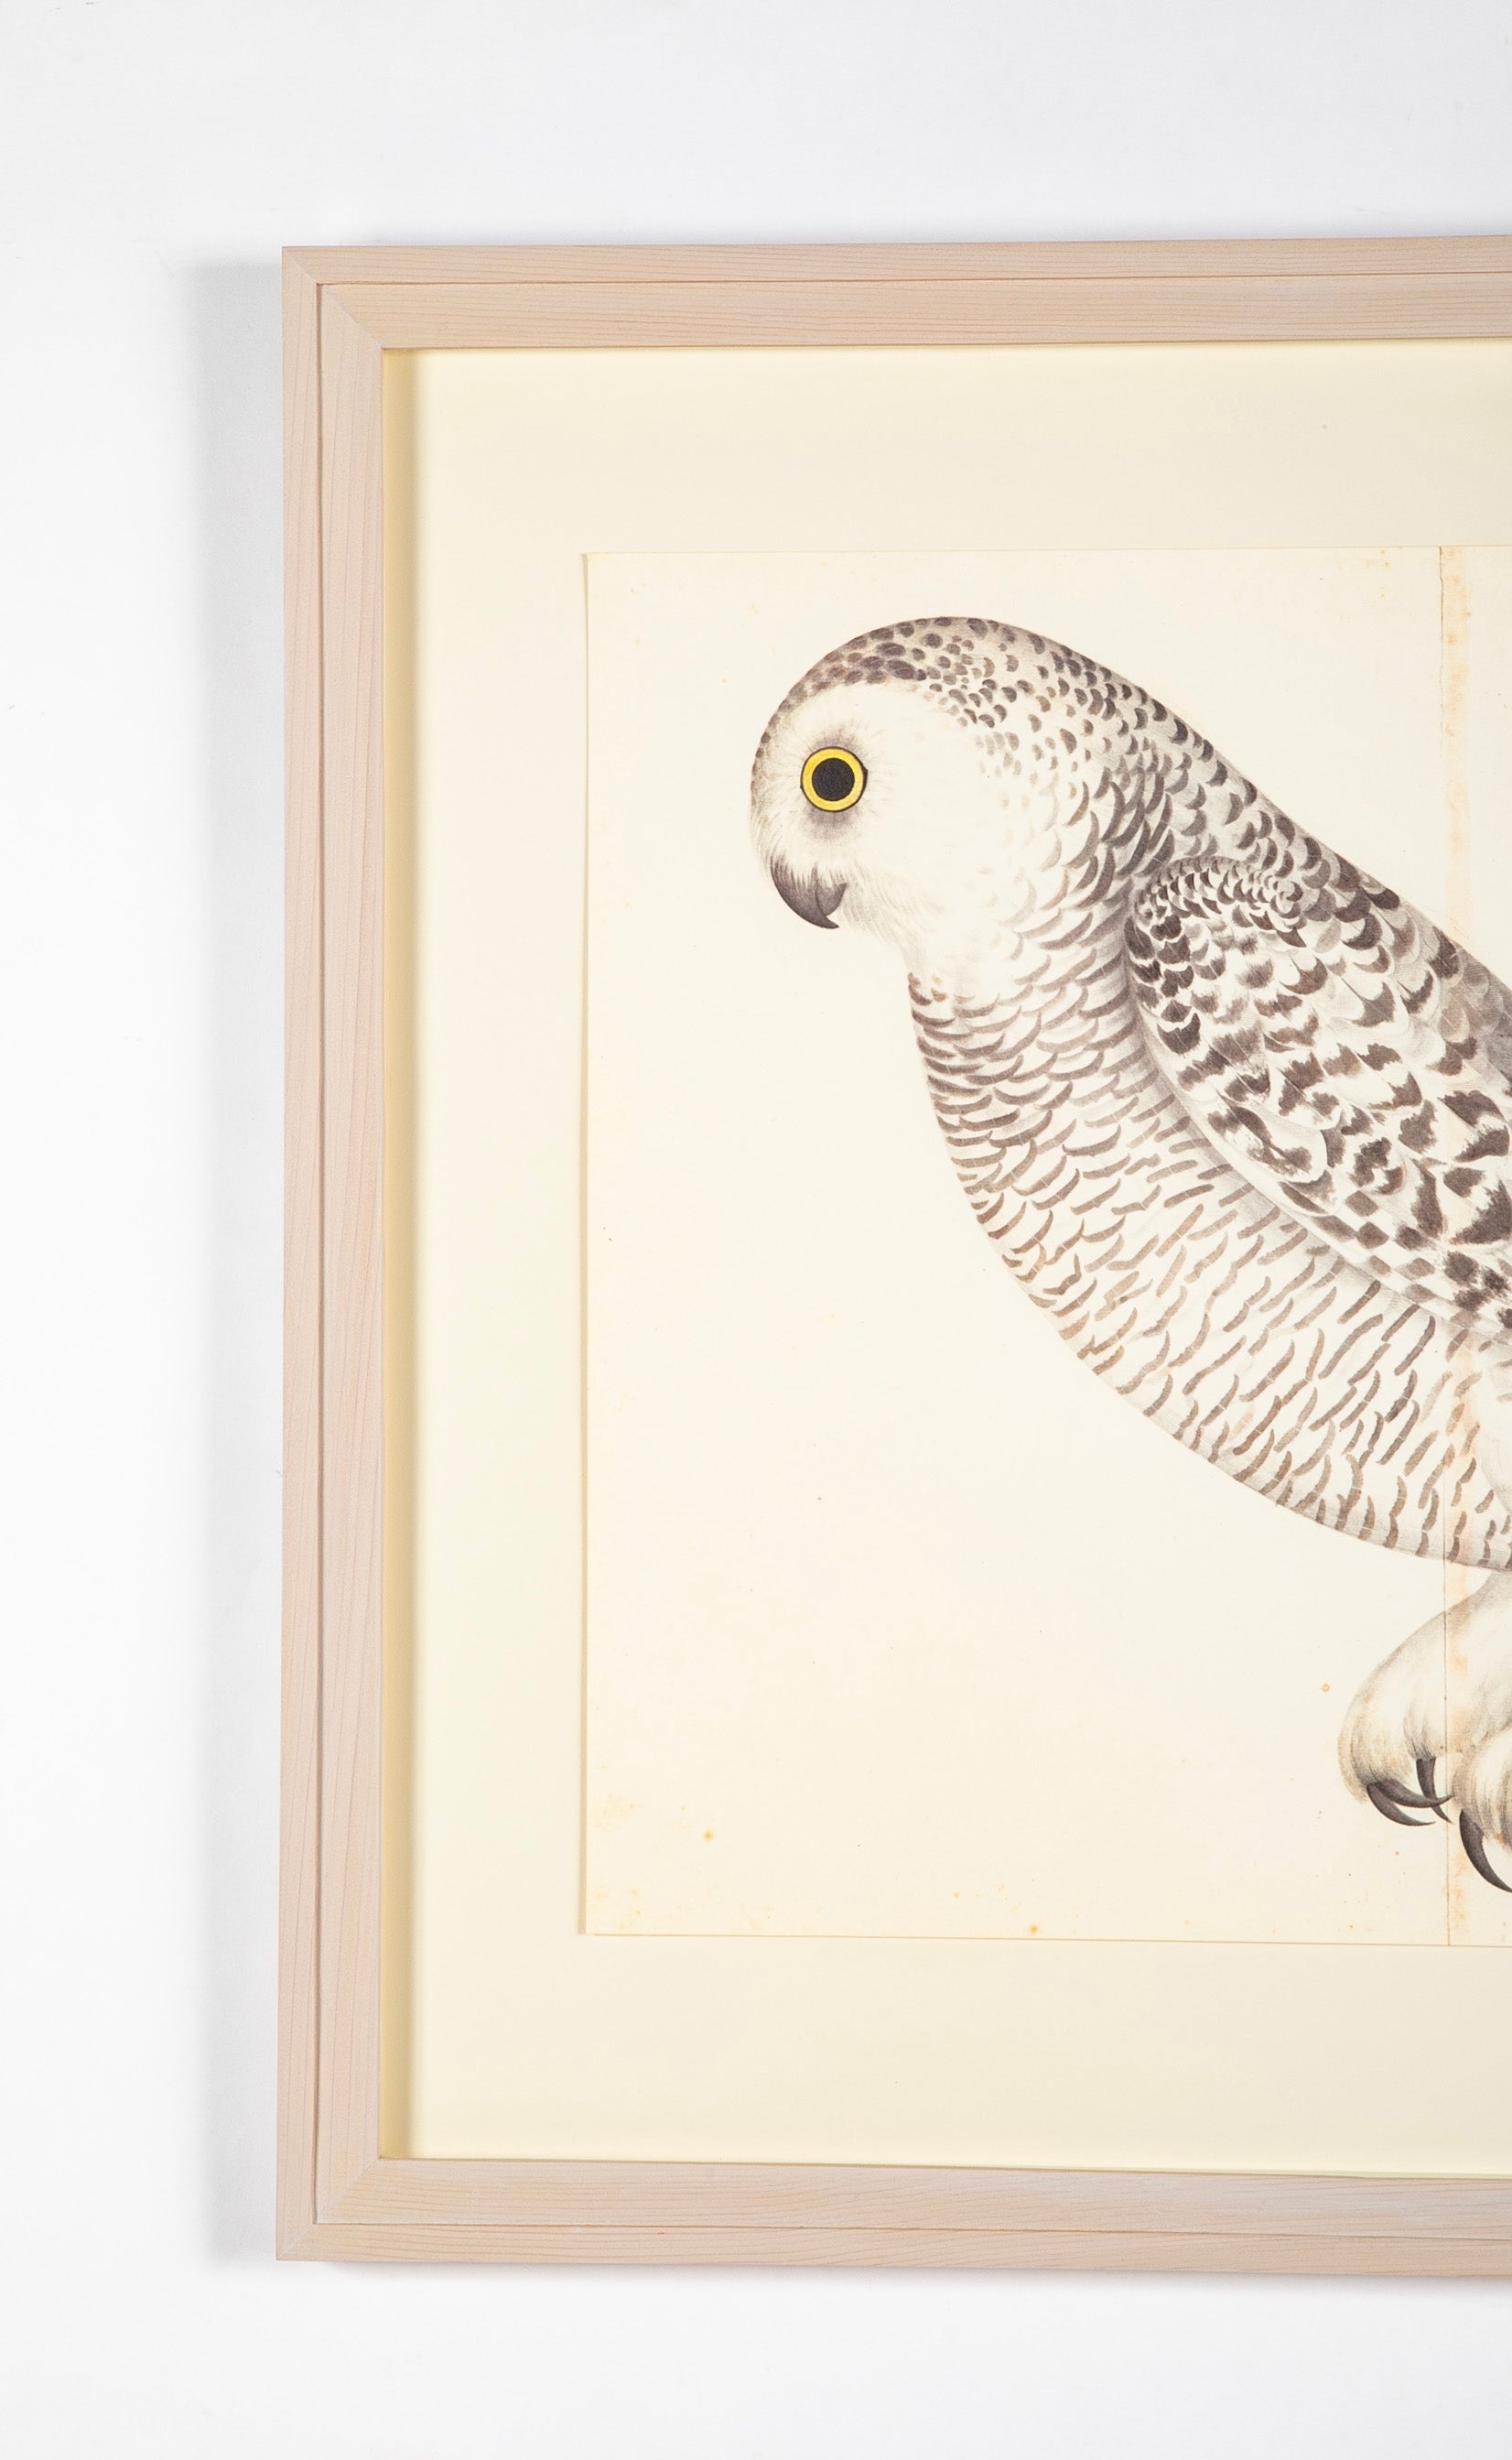 Offset Lithograph of "Snowy Owl, PL 27" from the "The Great Bird Book" by Olof Rudbeck The Younger (1660-1740)